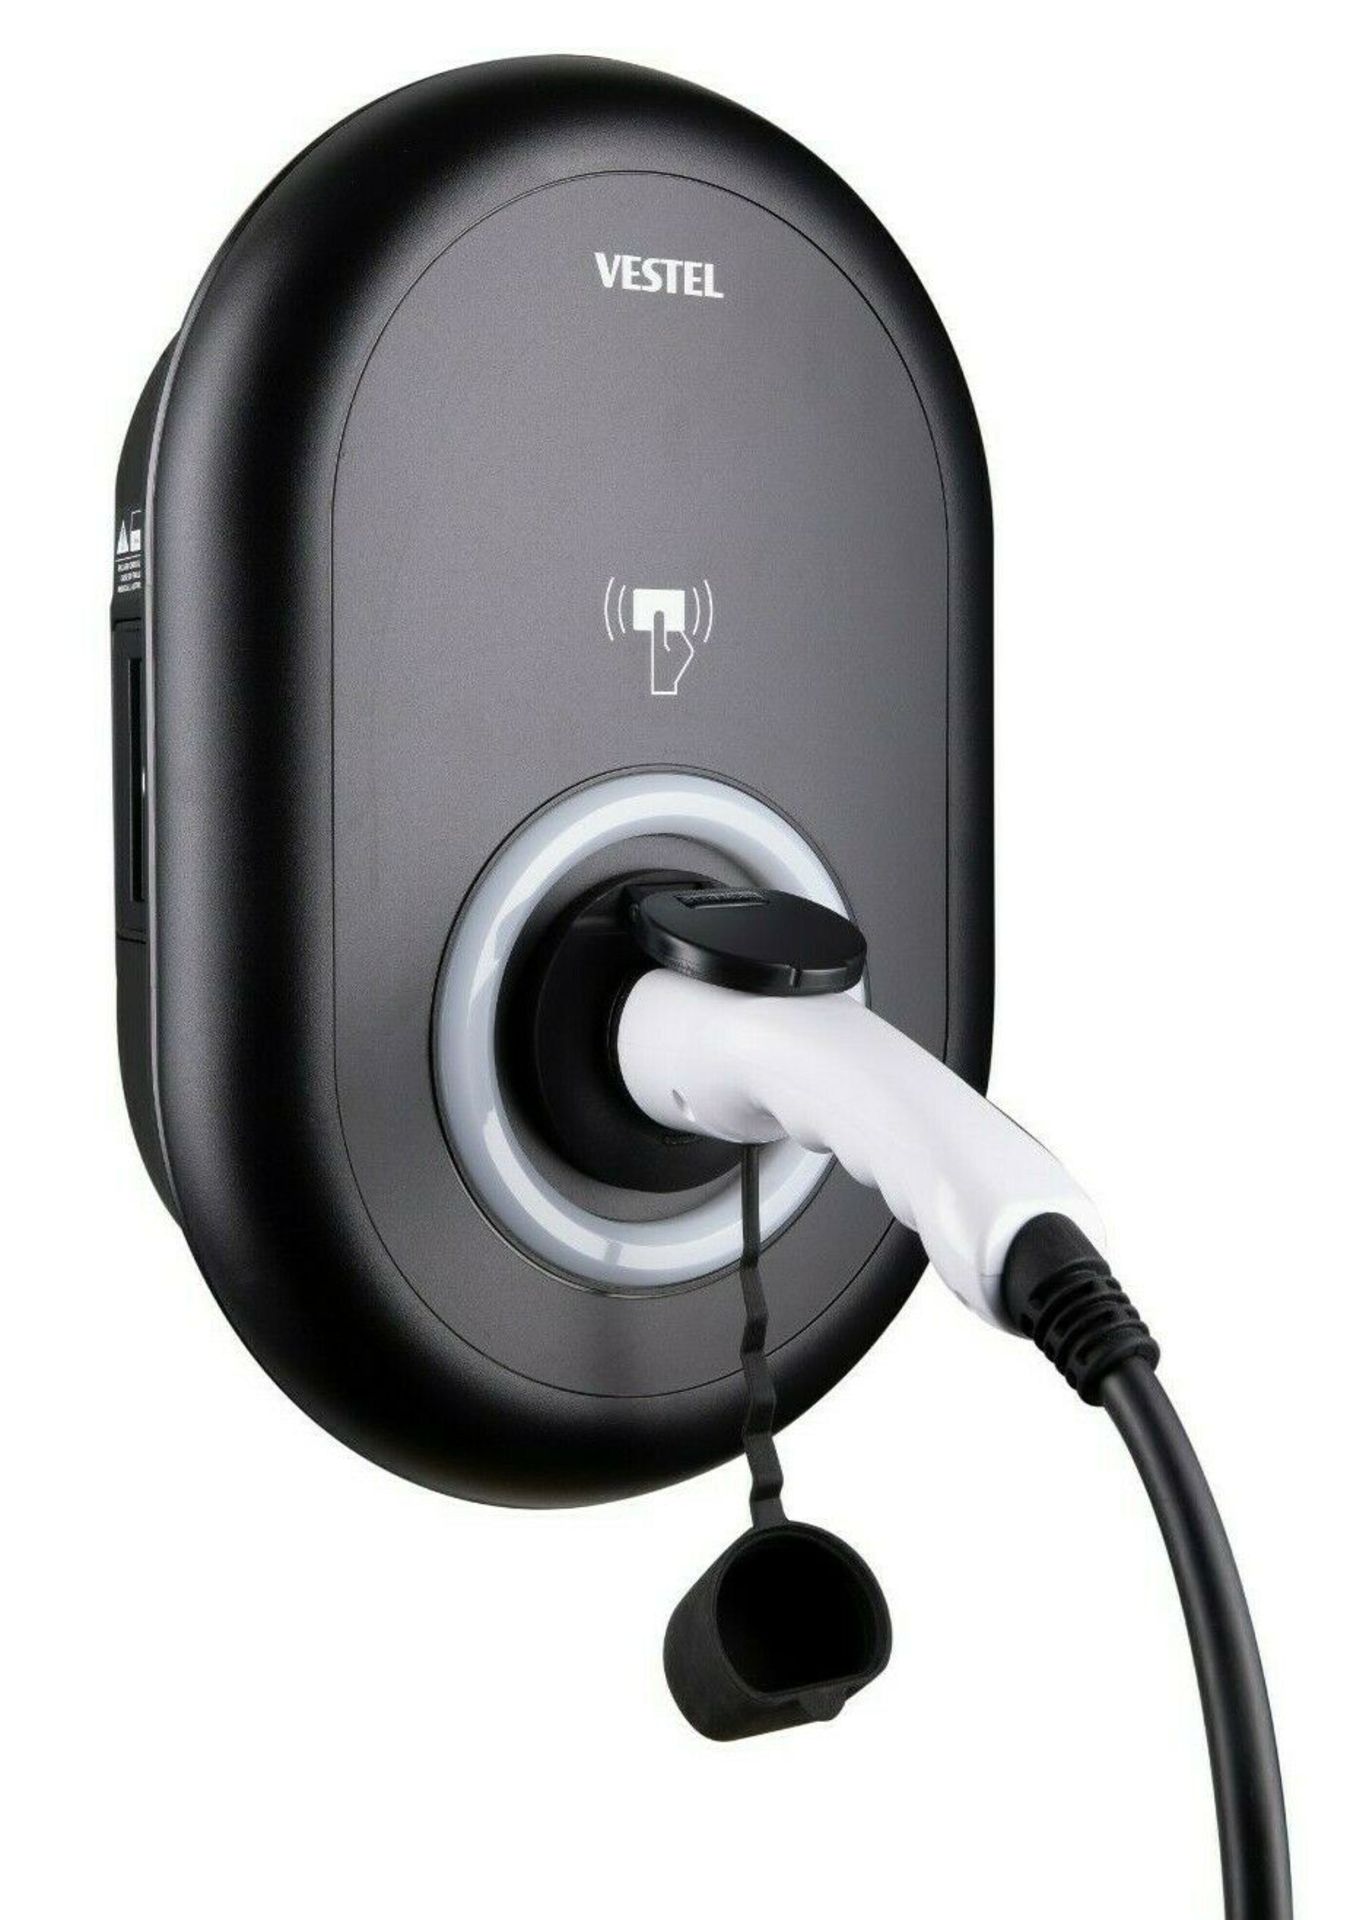 Vestel electric vehicle charger - Image 4 of 7